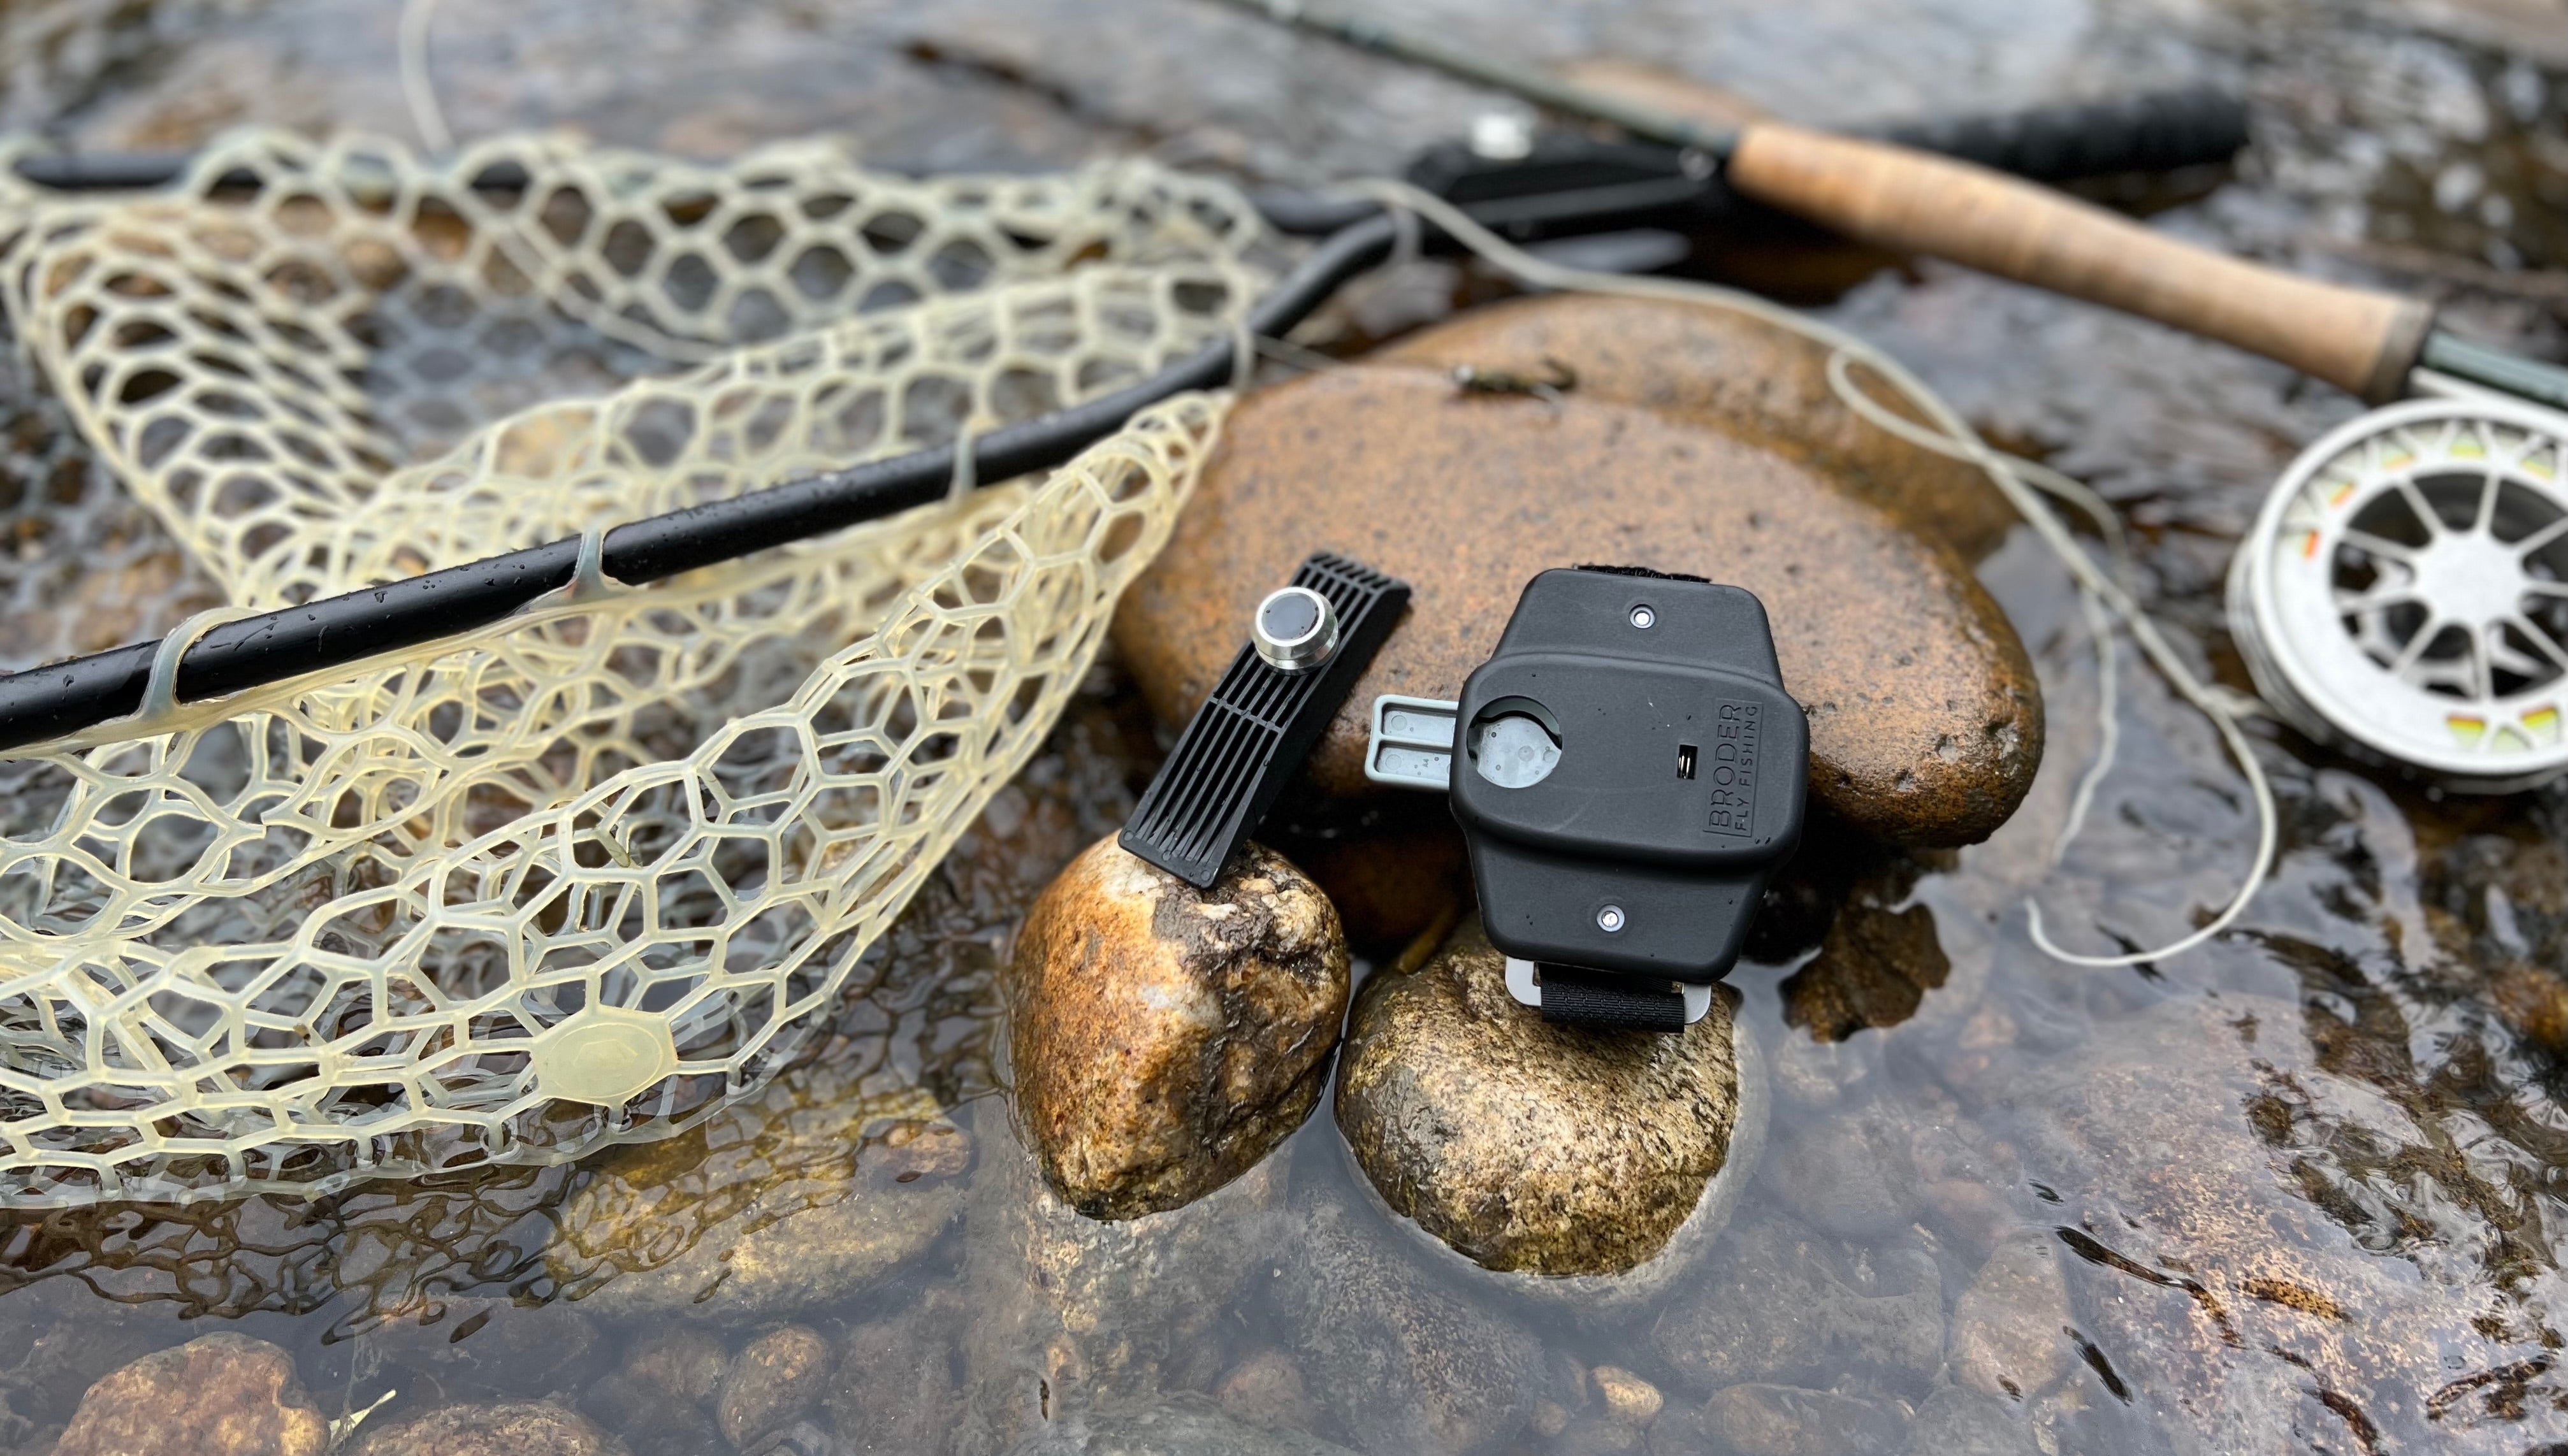 Broder Fly Fishing - Makers of the Broder Net Clip